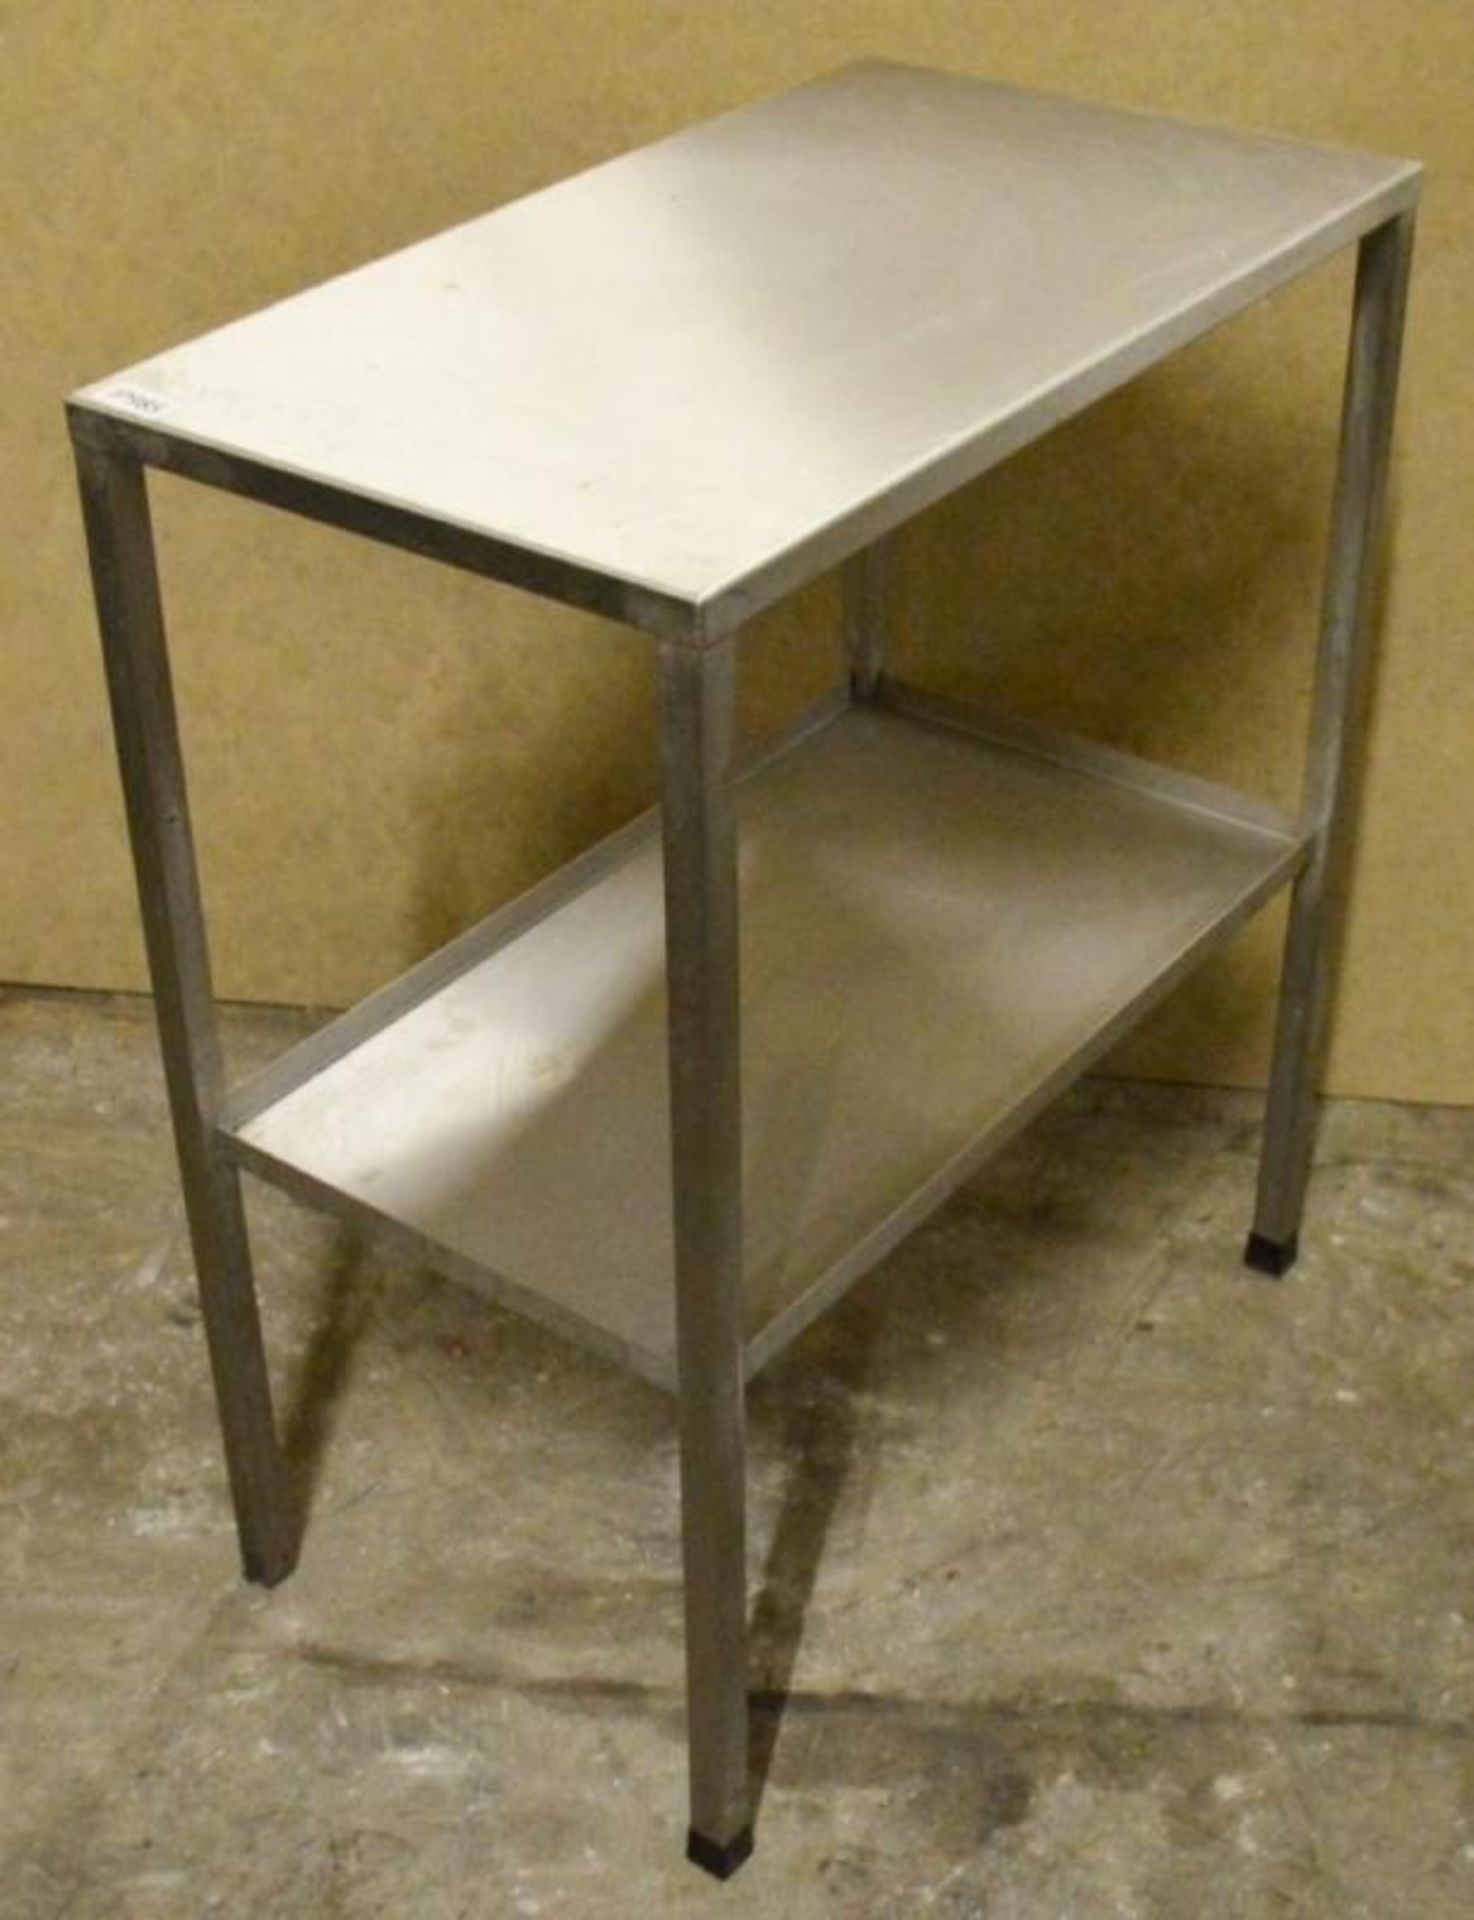 1 x Stainless Steel Prep Table With Undershelf - H83 x W40 x D70 cms - CL282 - Ref JP985 - Location: - Image 3 of 3